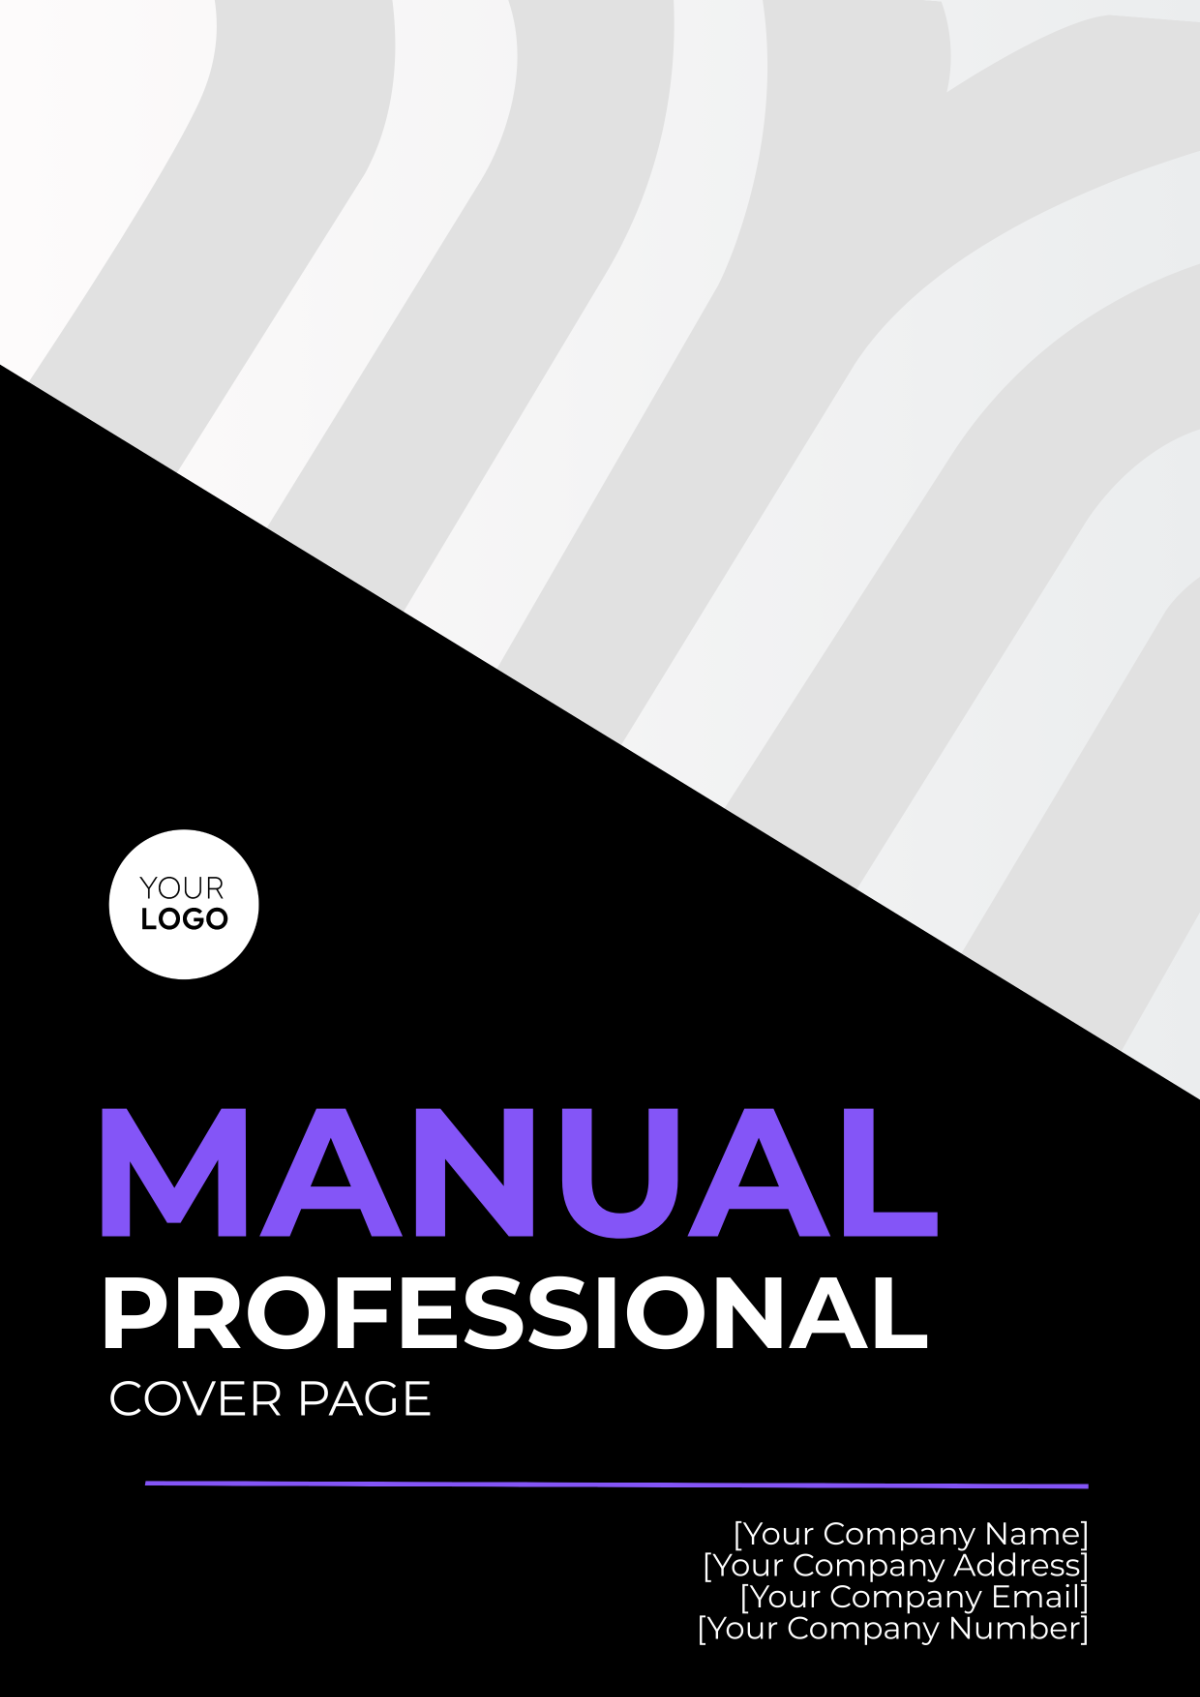 Manual Professional Cover Page